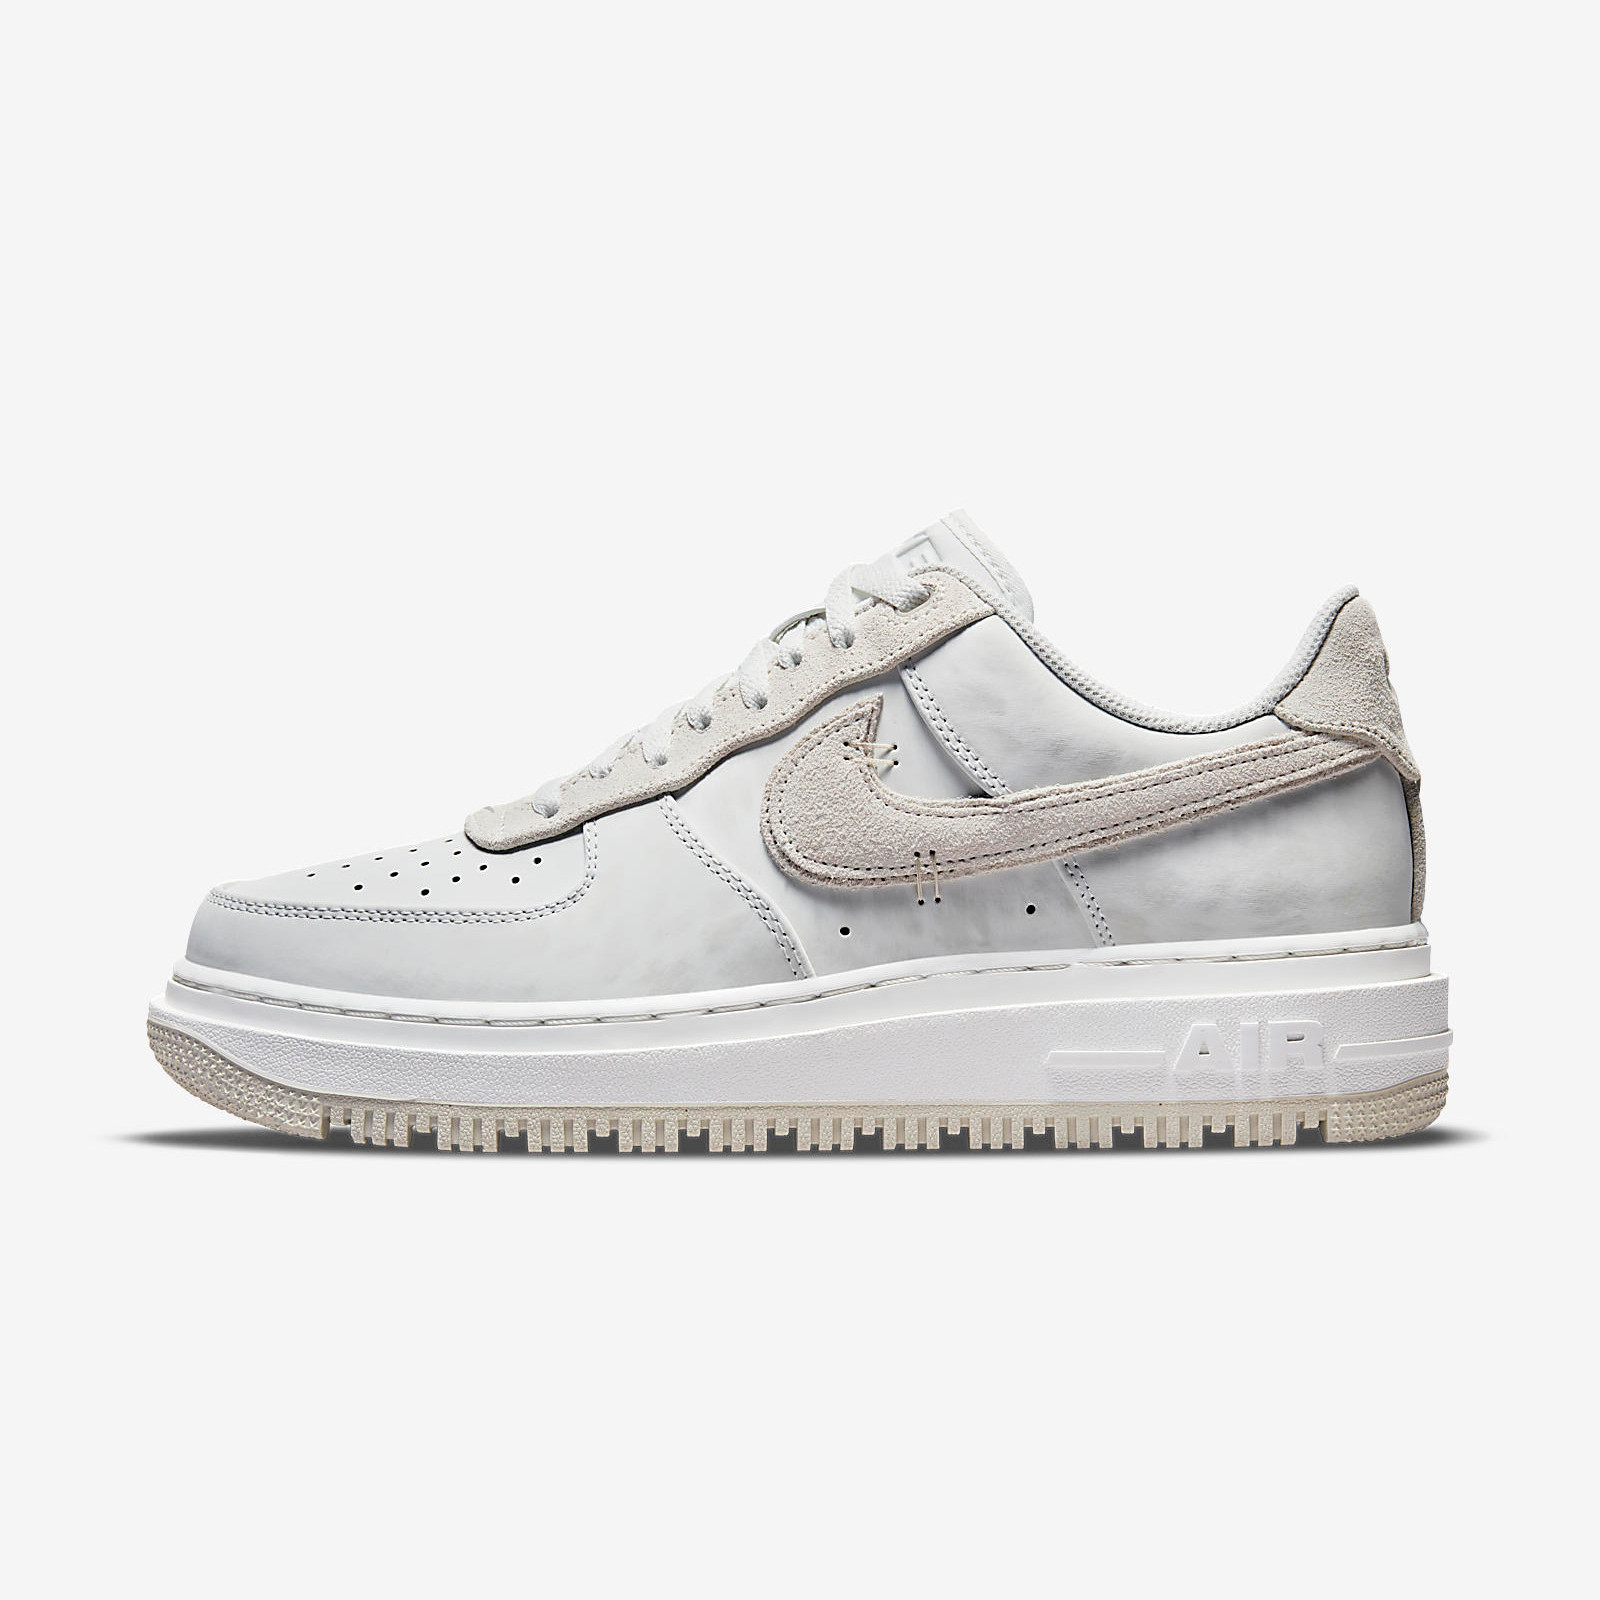 Nike Air Force 1 Luxe
« Summit White »